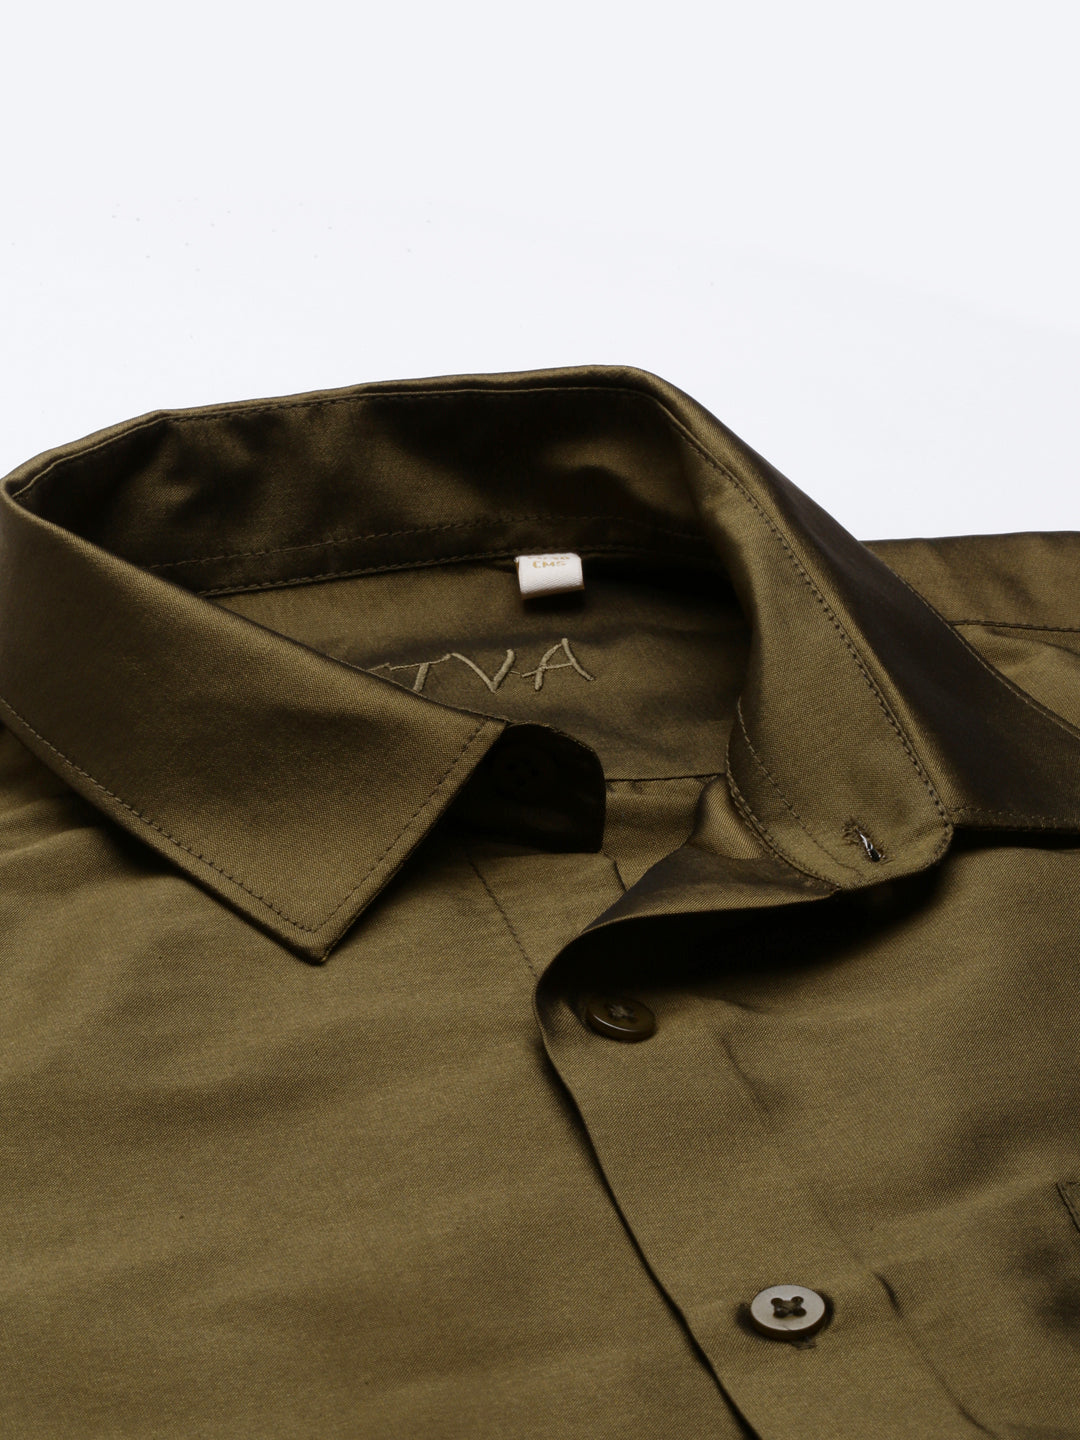 Dark Green Polyester Slim Fit Solid Party Shirt